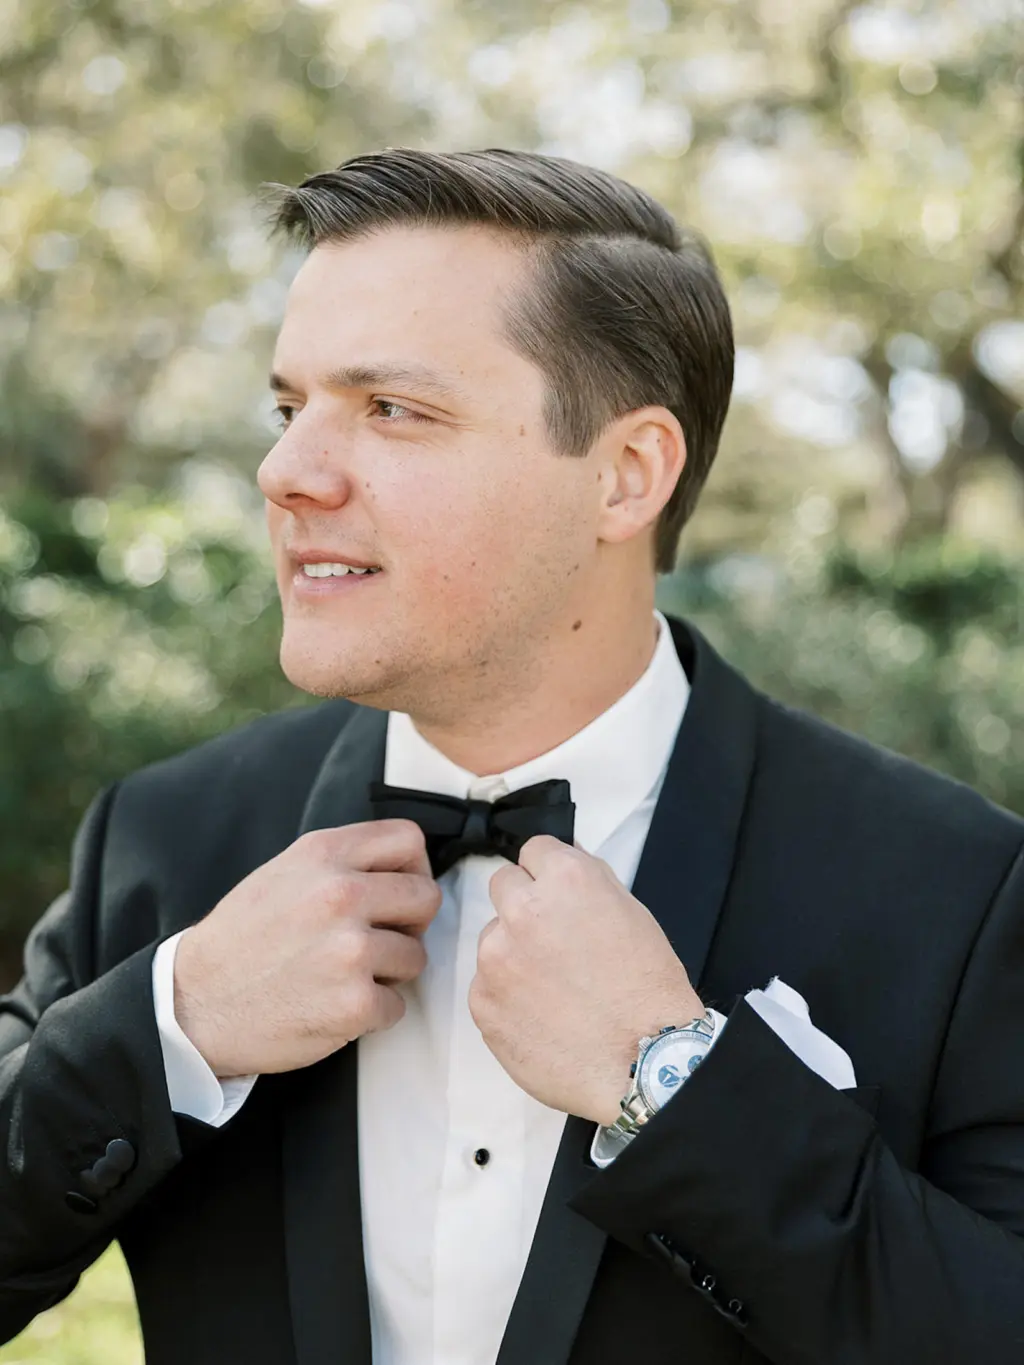 Groom Getting Ready | Black Tuxedo and Bowtie Inspiration